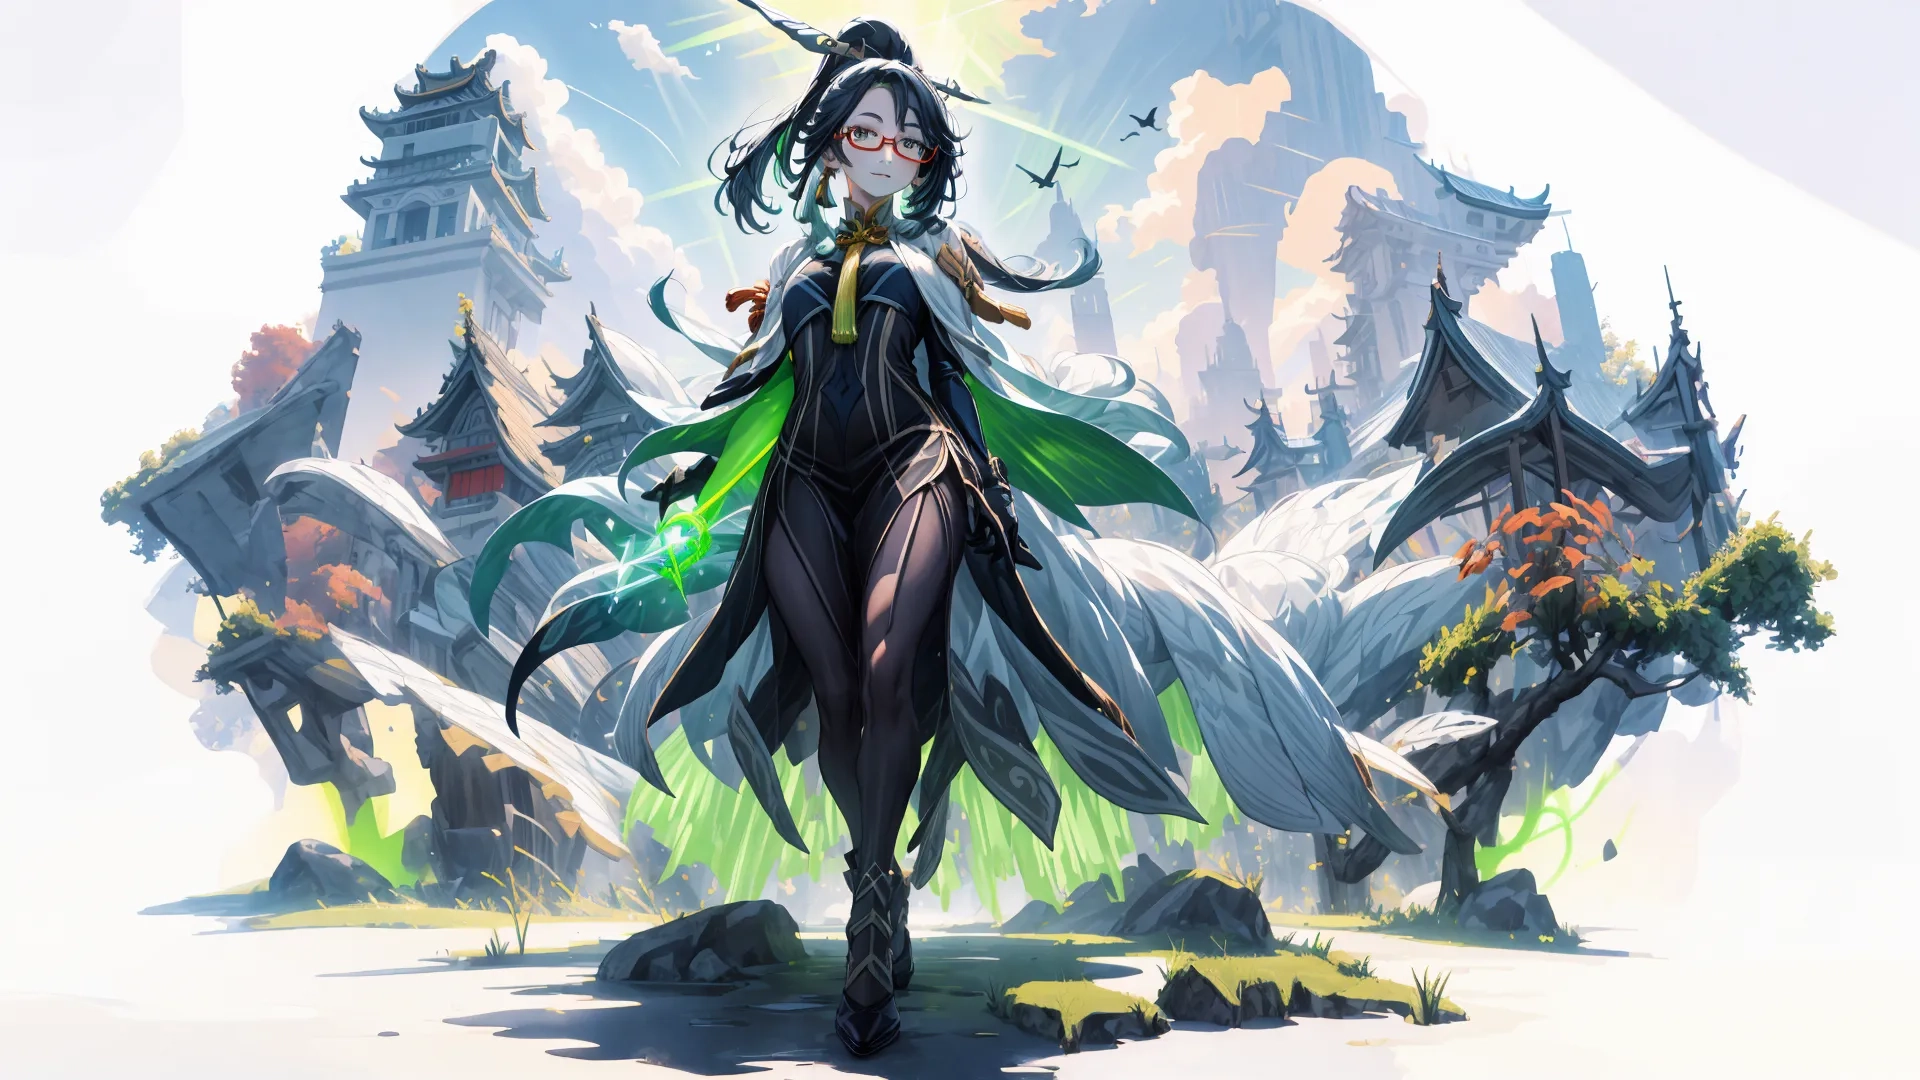 a girl in black outfit with green hair standing on a road by some trees near tall cliffs and houses on a sunny dayskyg landscape
